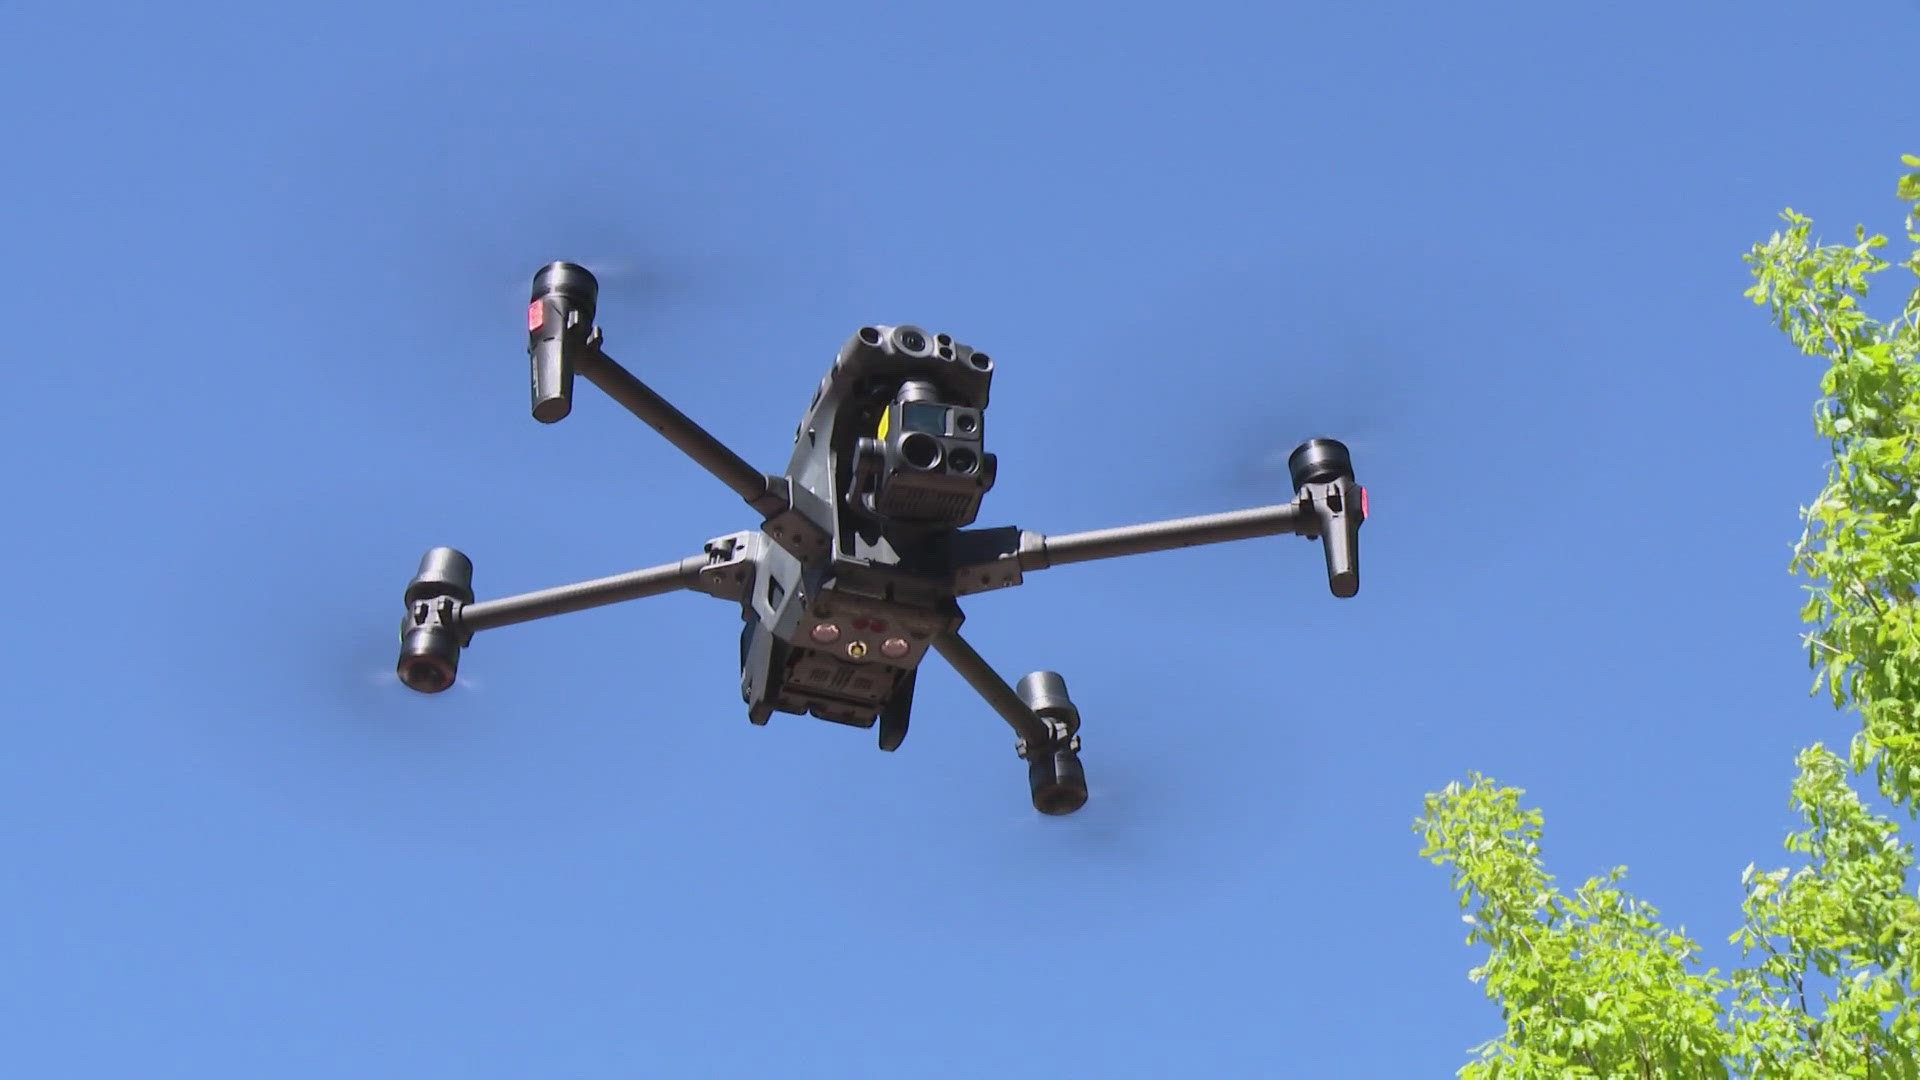 The Webster Groves Police Department has a new police chief. It comes on the heels of a new drone safety program.